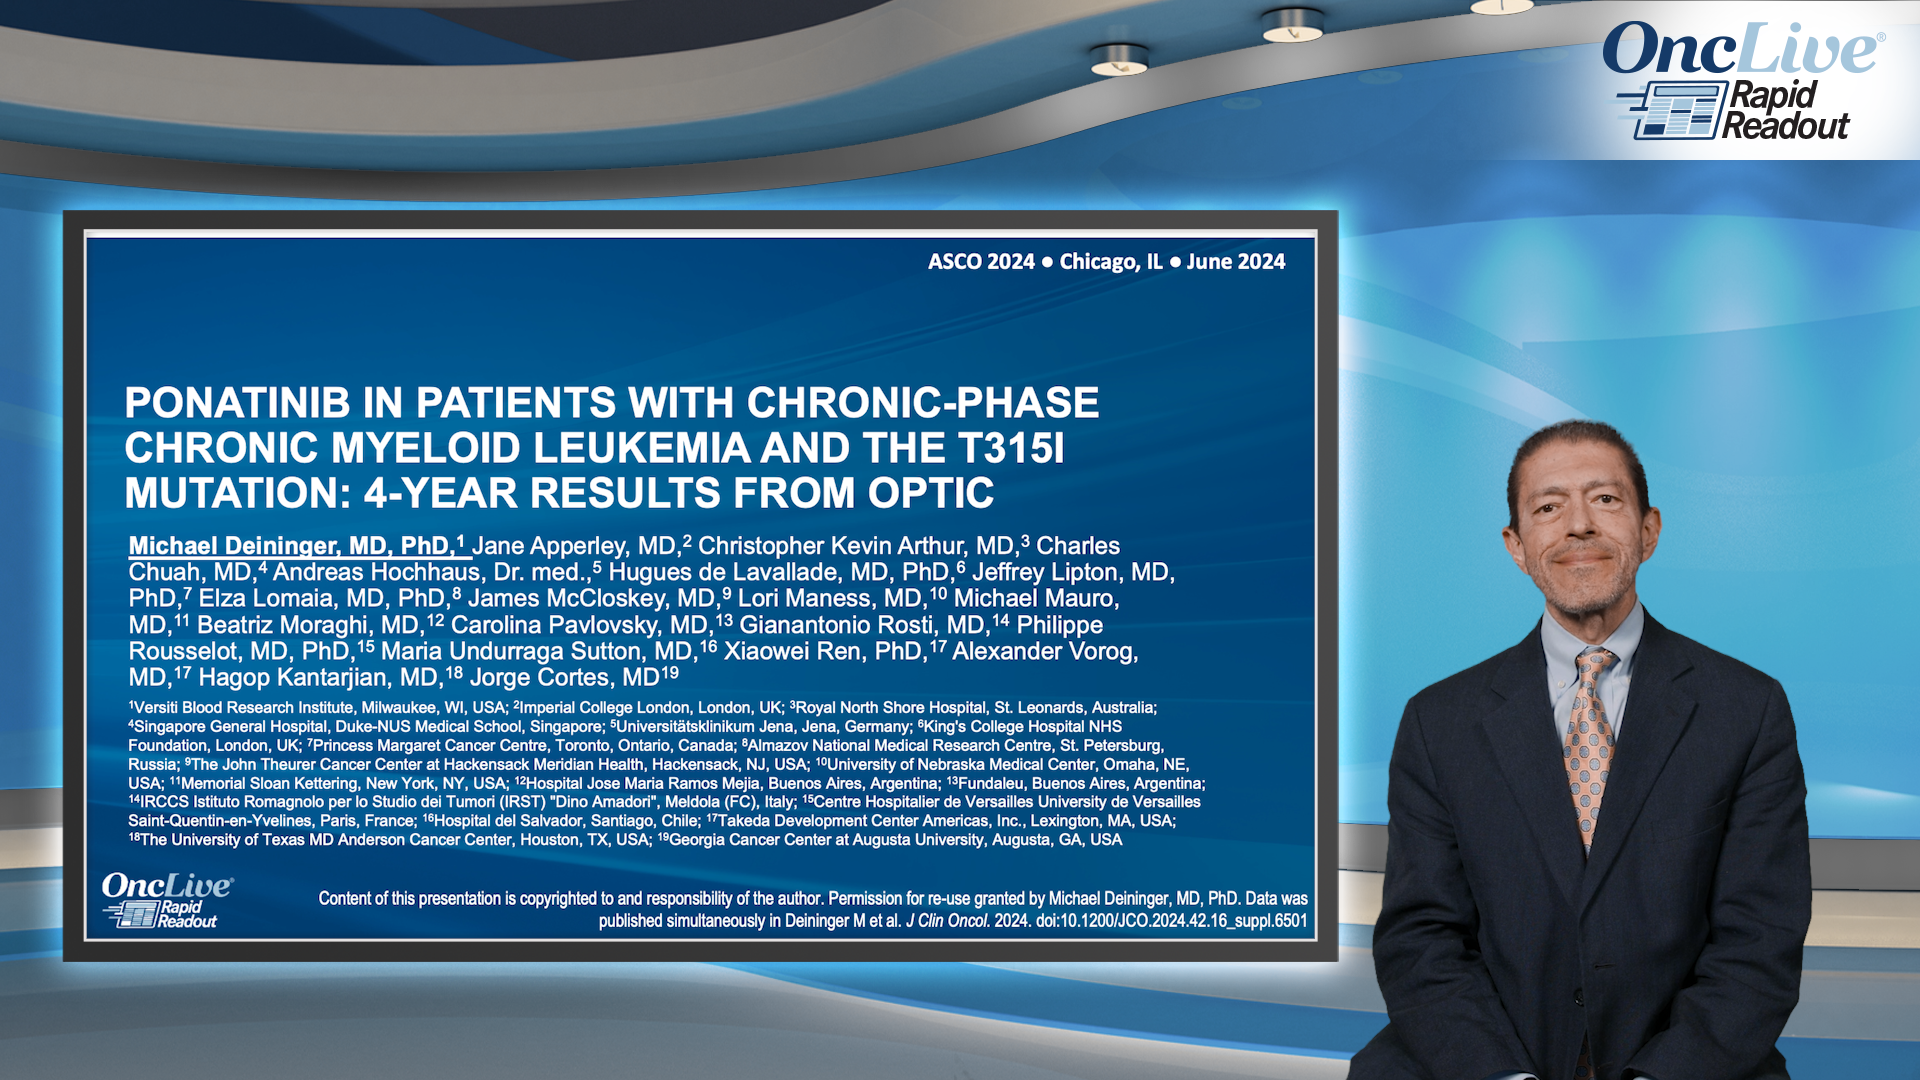 Ponatinib in patients with chronic-phase chronic myeloid leukemia and the T315I mutation: 4-year results from OPTIC